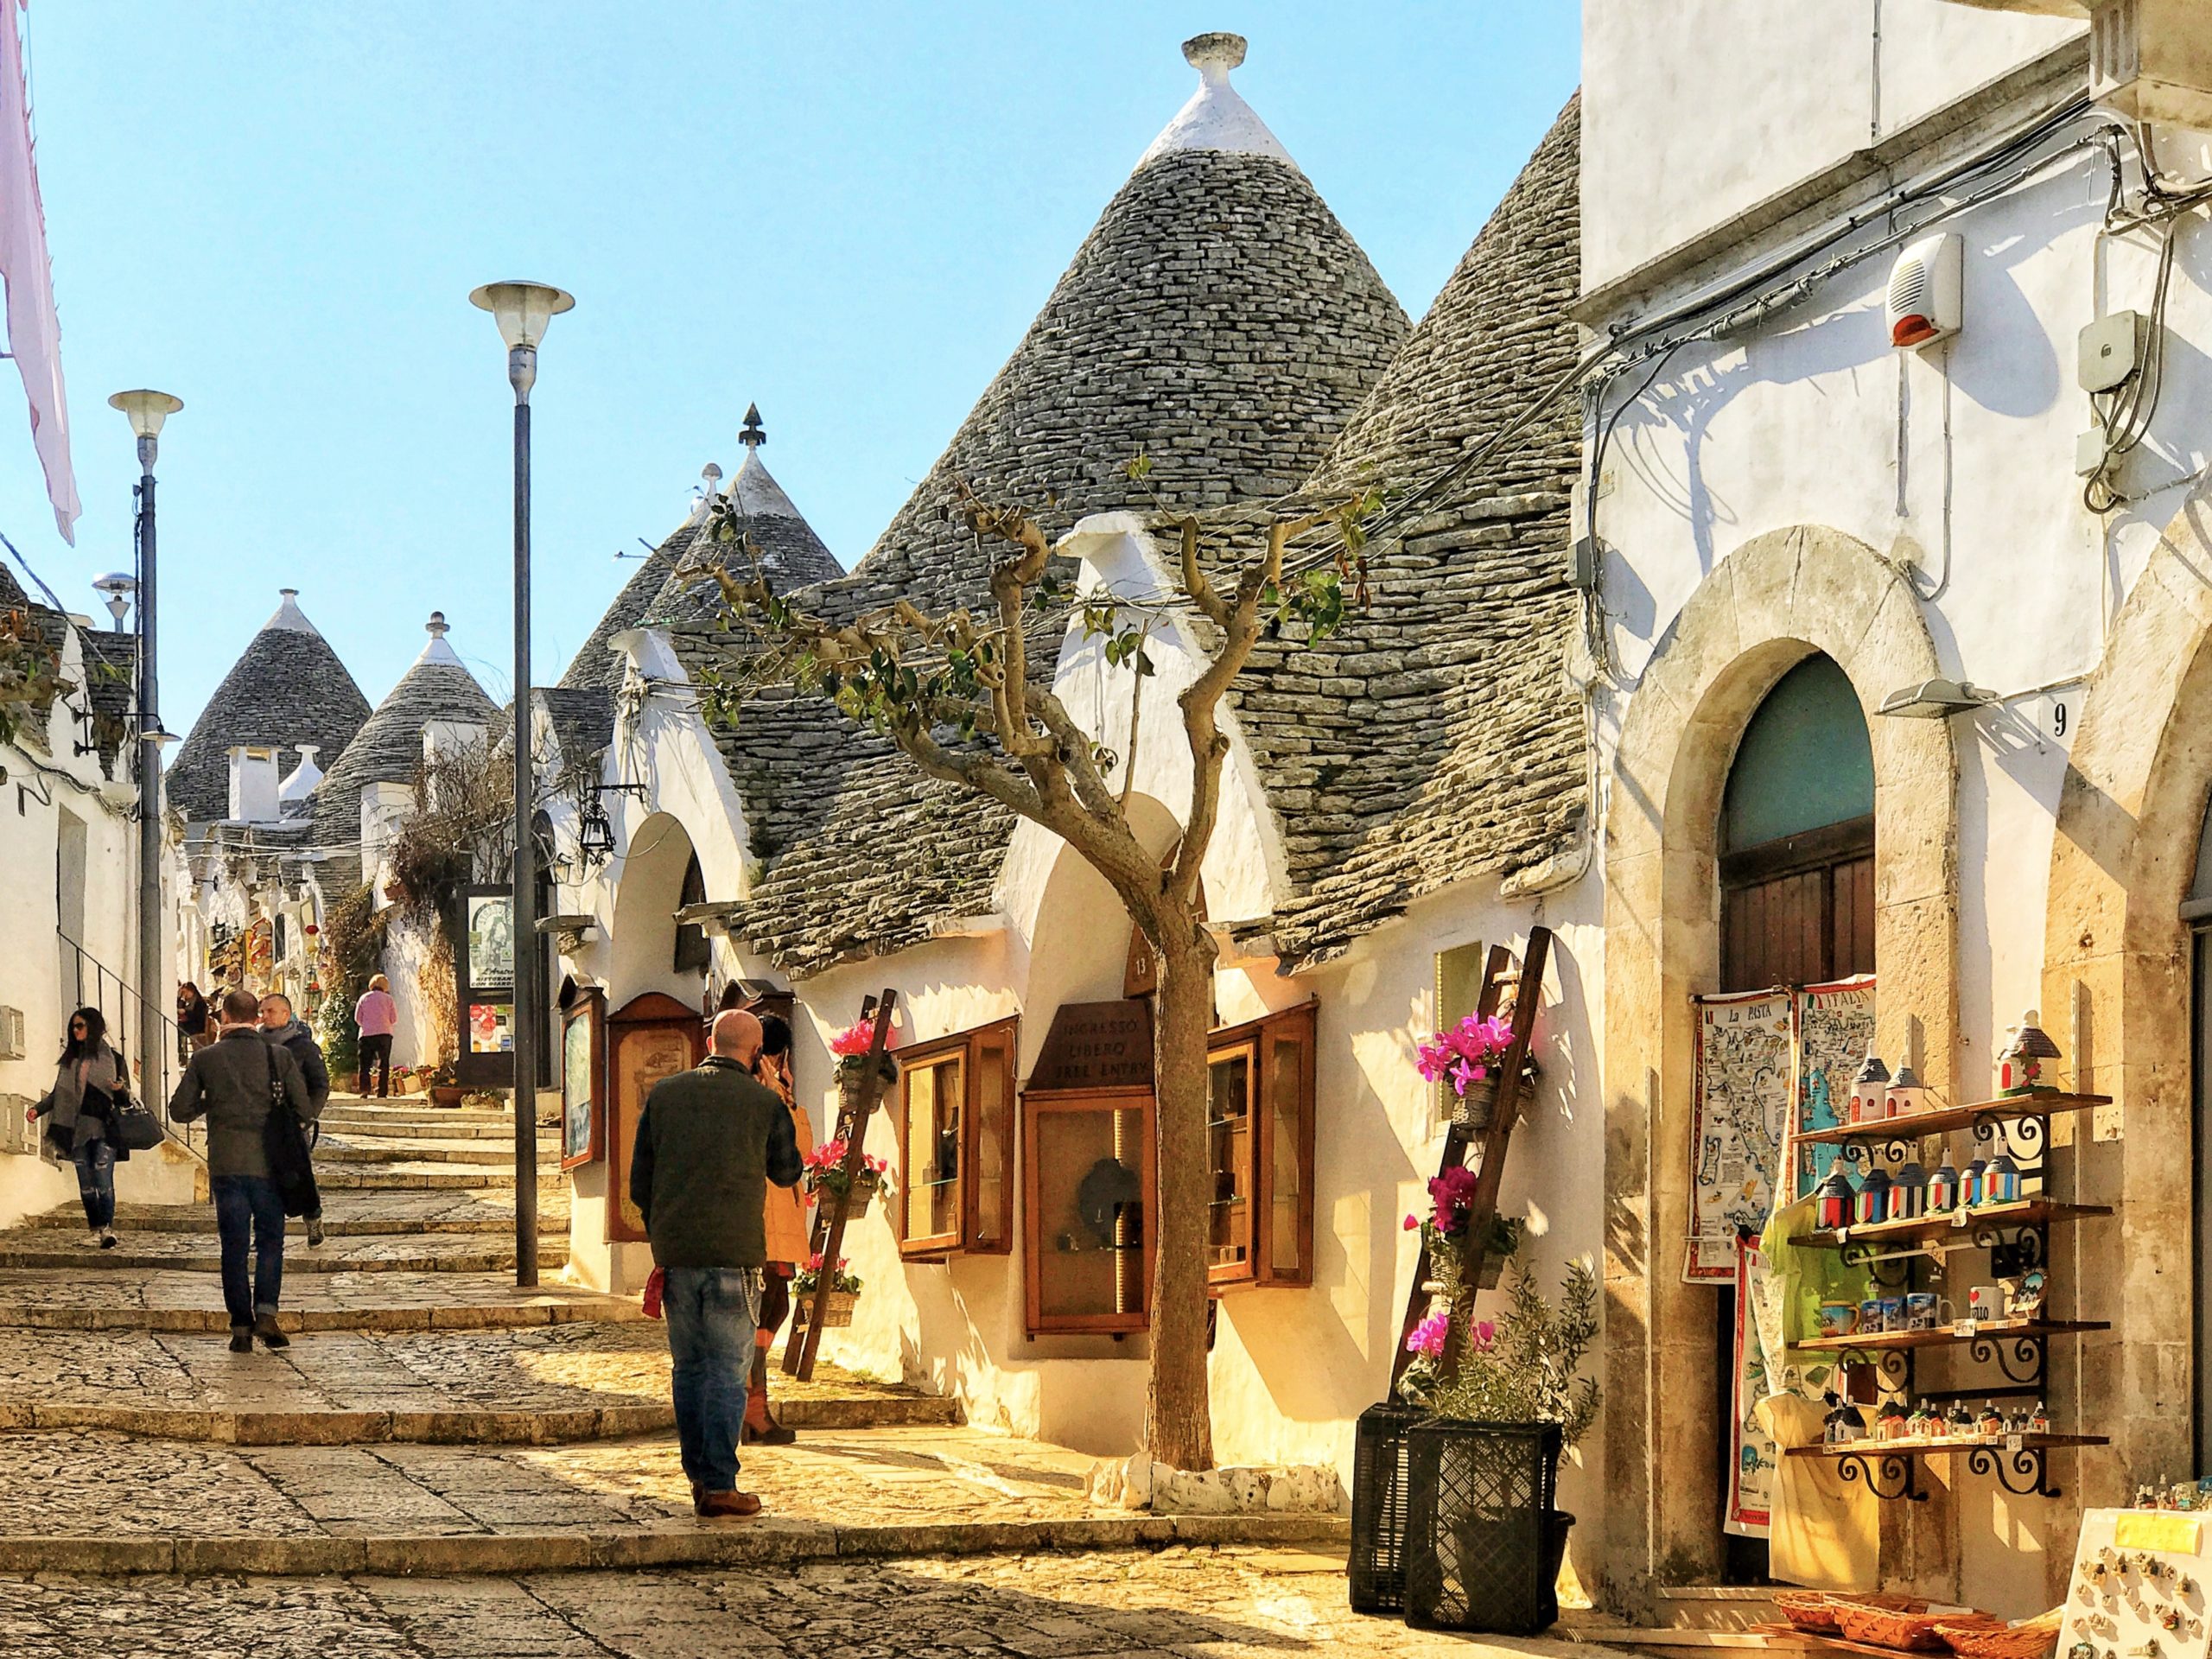 Alberobello is where you find the greatest density of Puglia’s trulli - small white buildings with conical stone roofs.